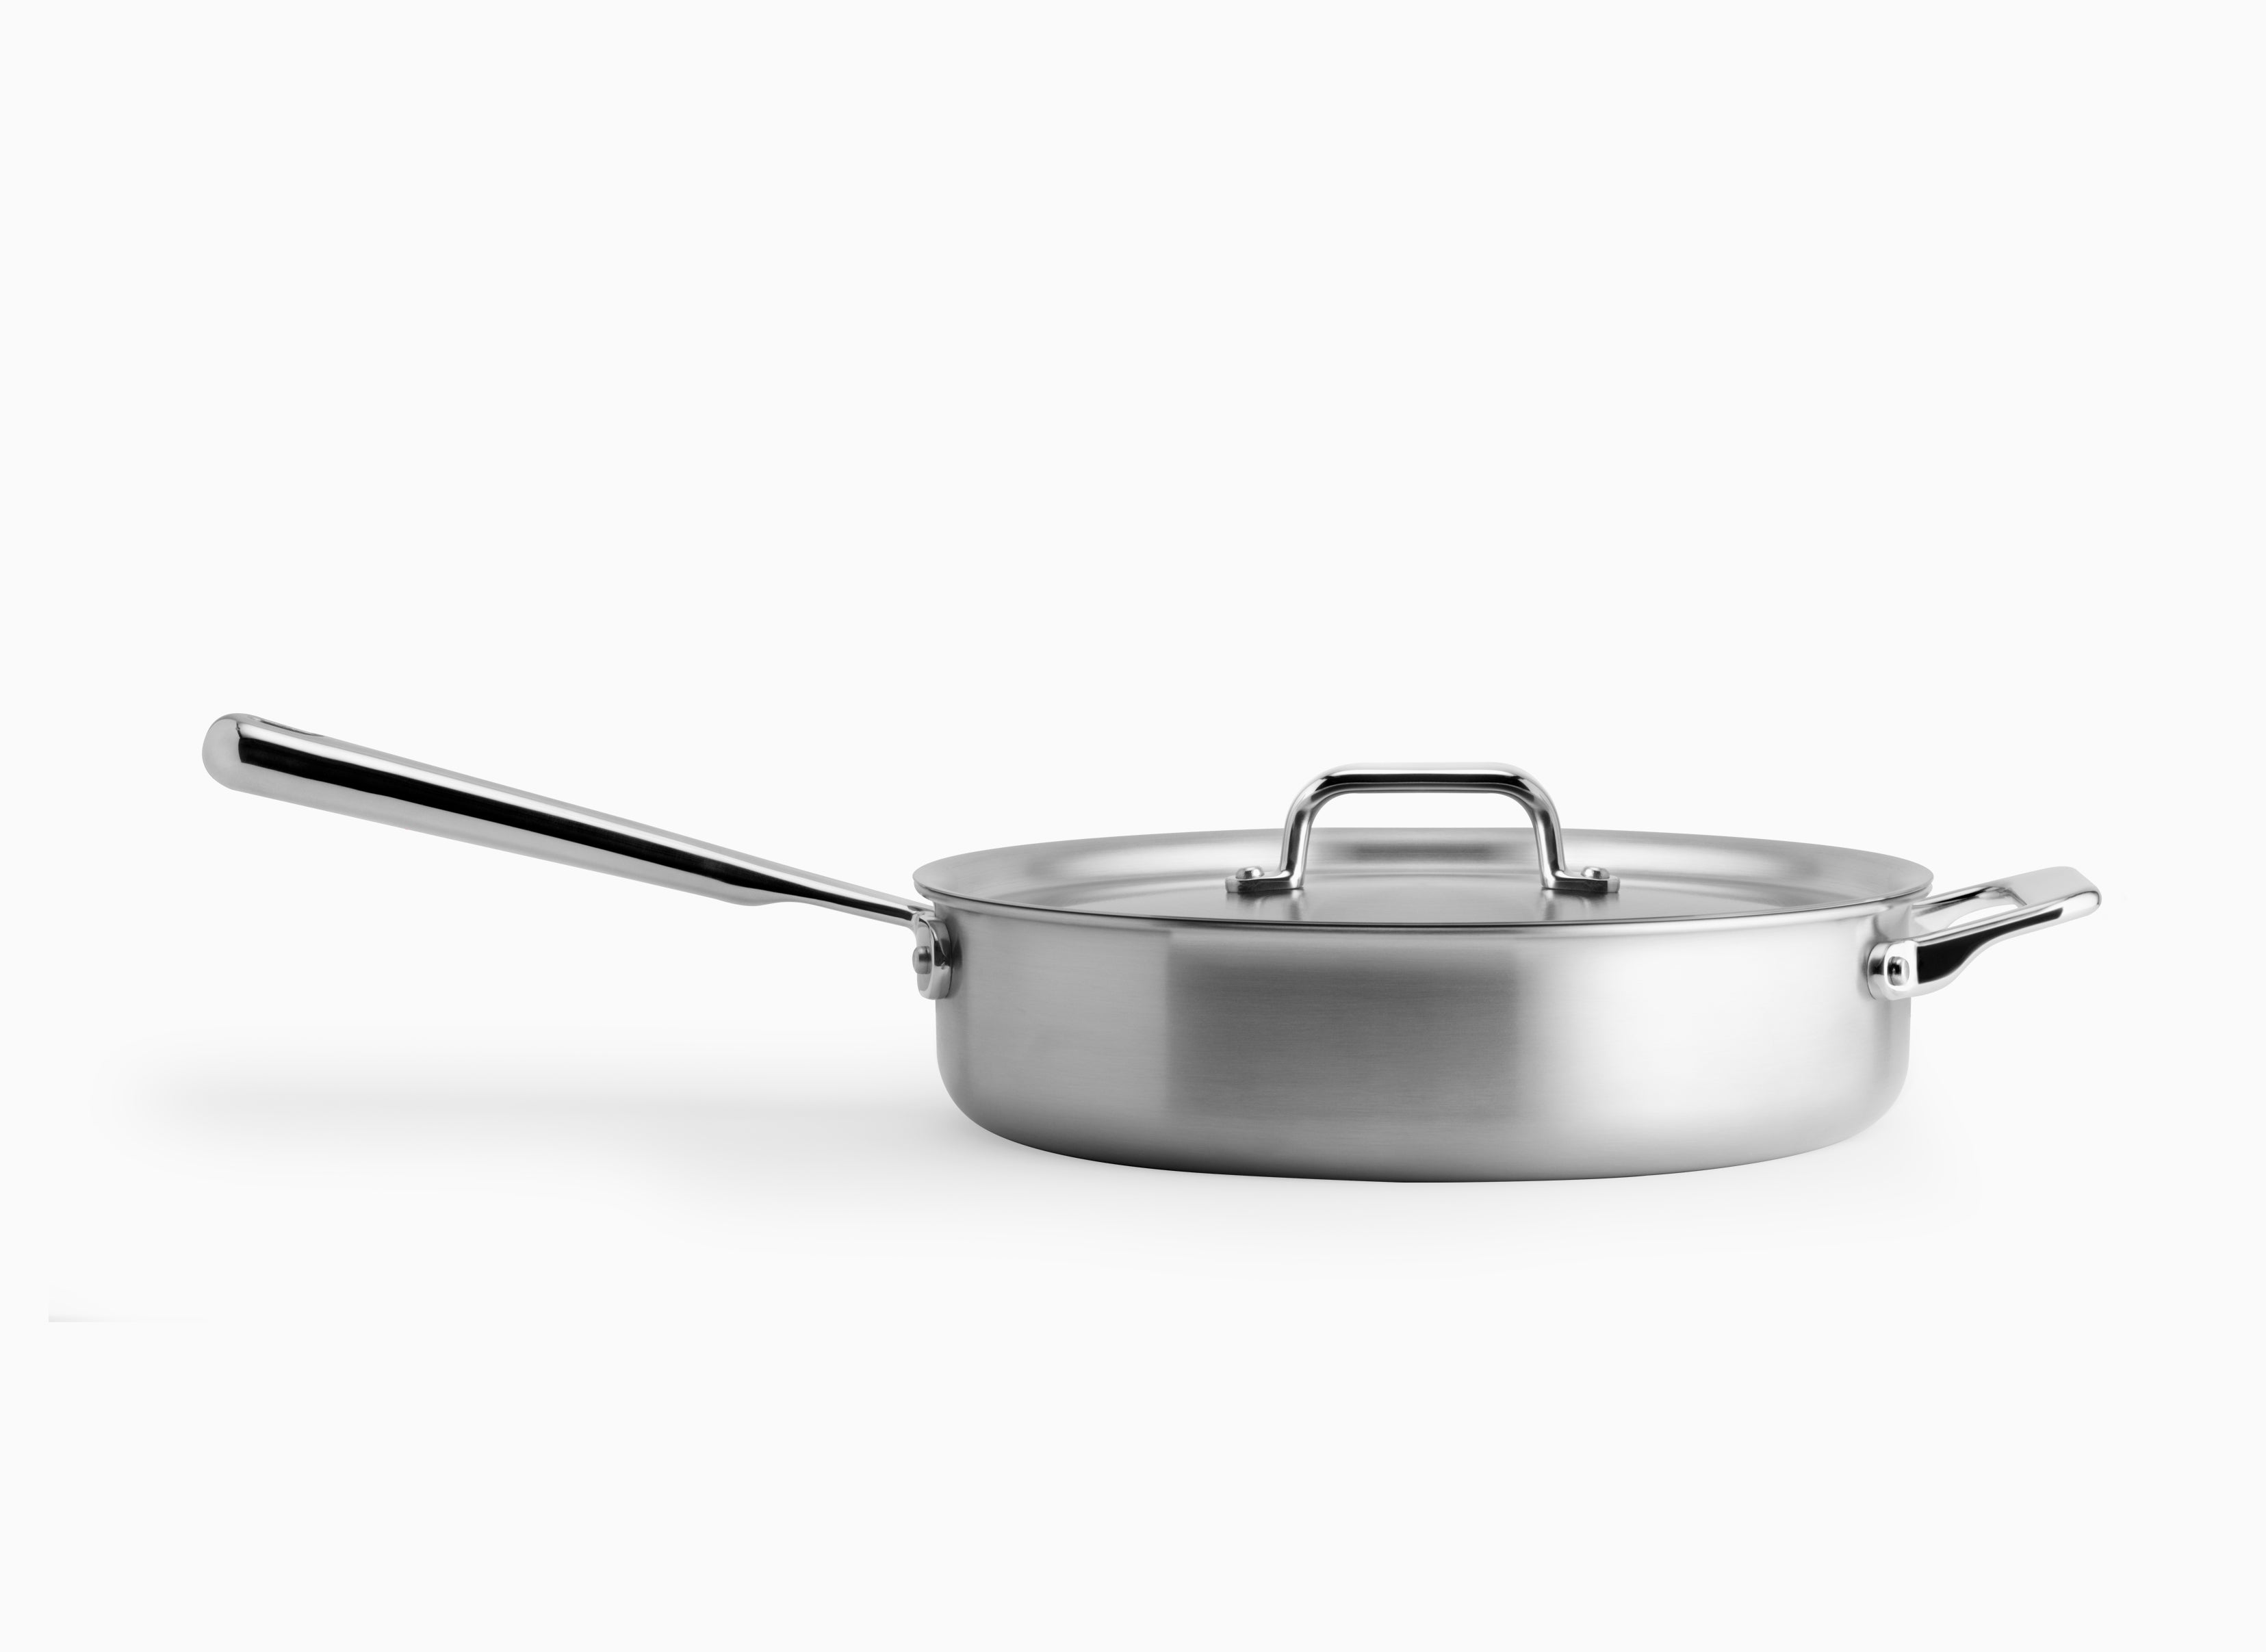  Misen 5-Ply Stainless Steel Cookware Set: 3 QT Stainless Steel  Saucier with Lid, 3 QT Saute Pan with Lid & 10 Frying Pan - Excellent  Searing, Sauteing & Everyday Cooking 12-Piece